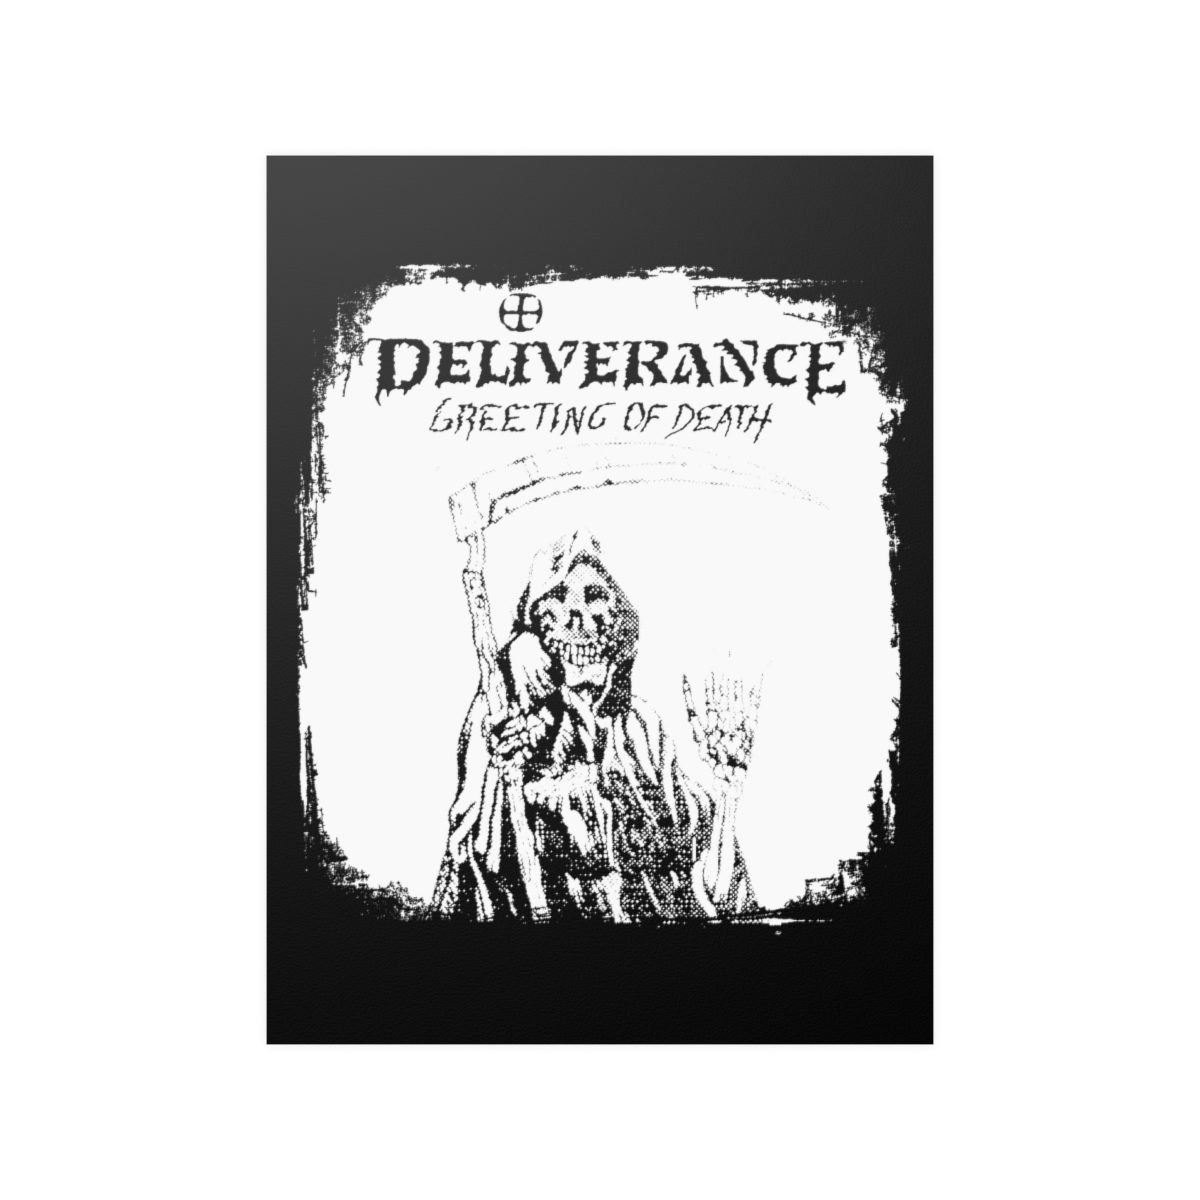 Deliverance – Greetings of Death Posters